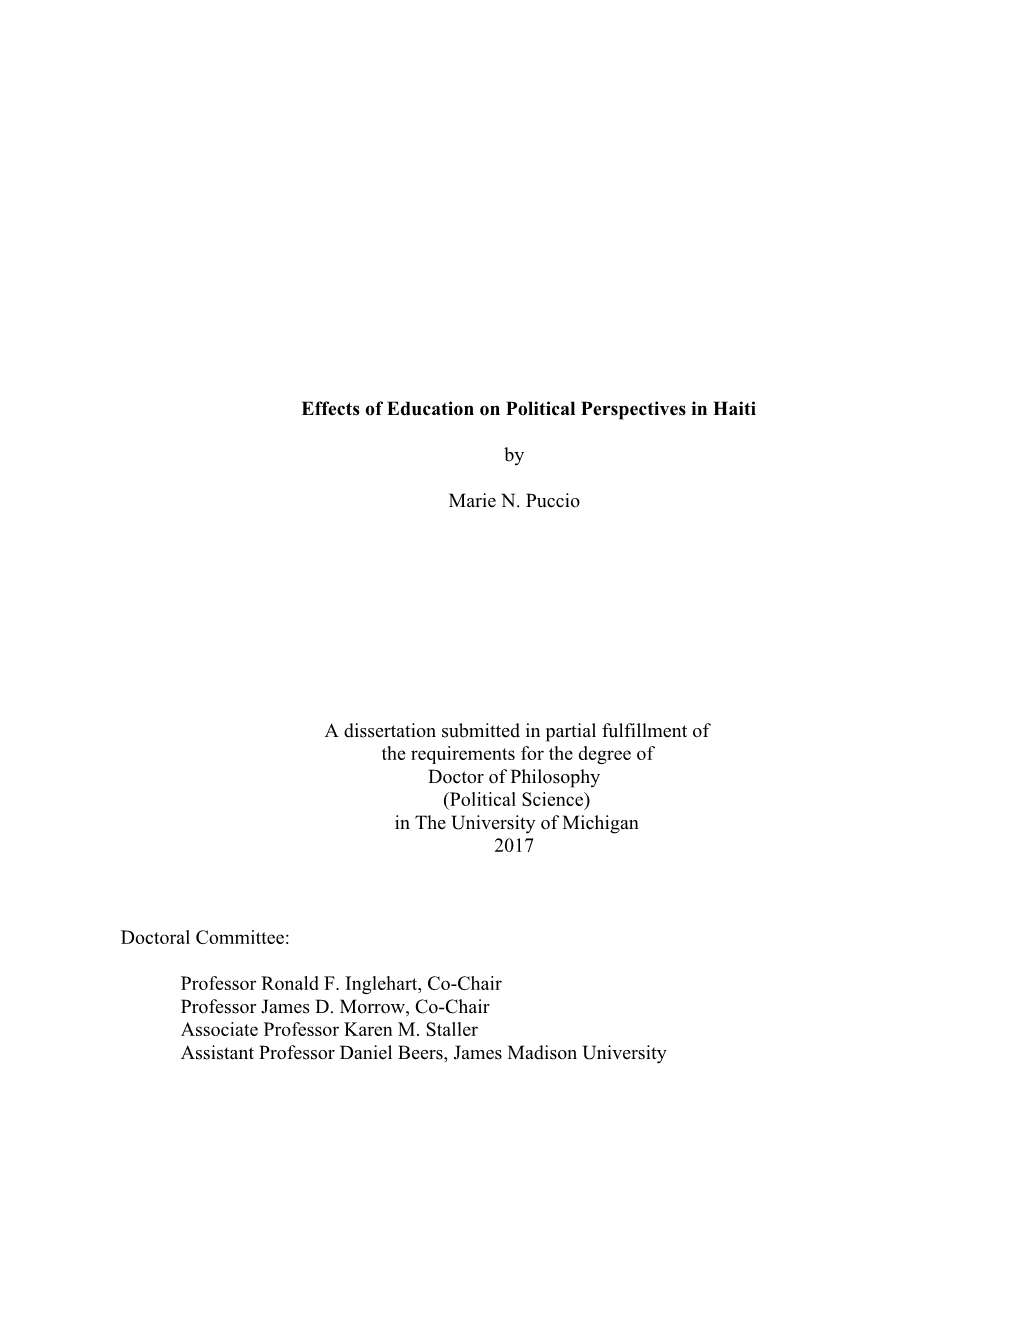 Effects of Education on Political Perspectives in Haiti by Marie N